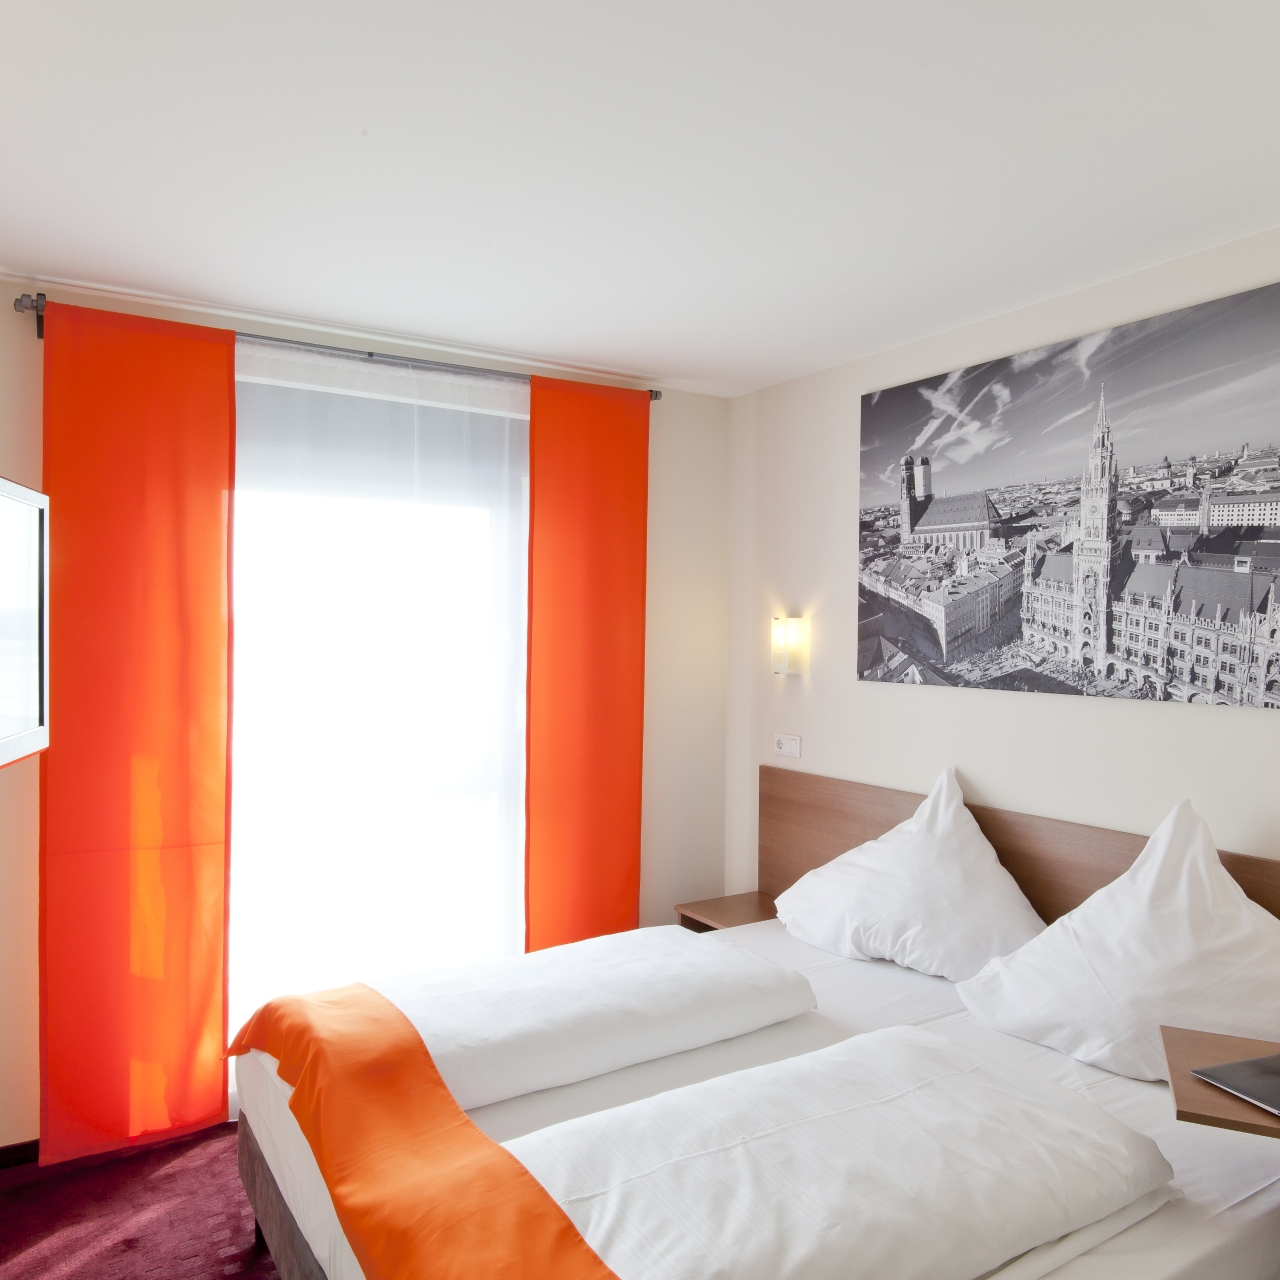 Hotel McDreams München-Messe Germany at HRS with free services